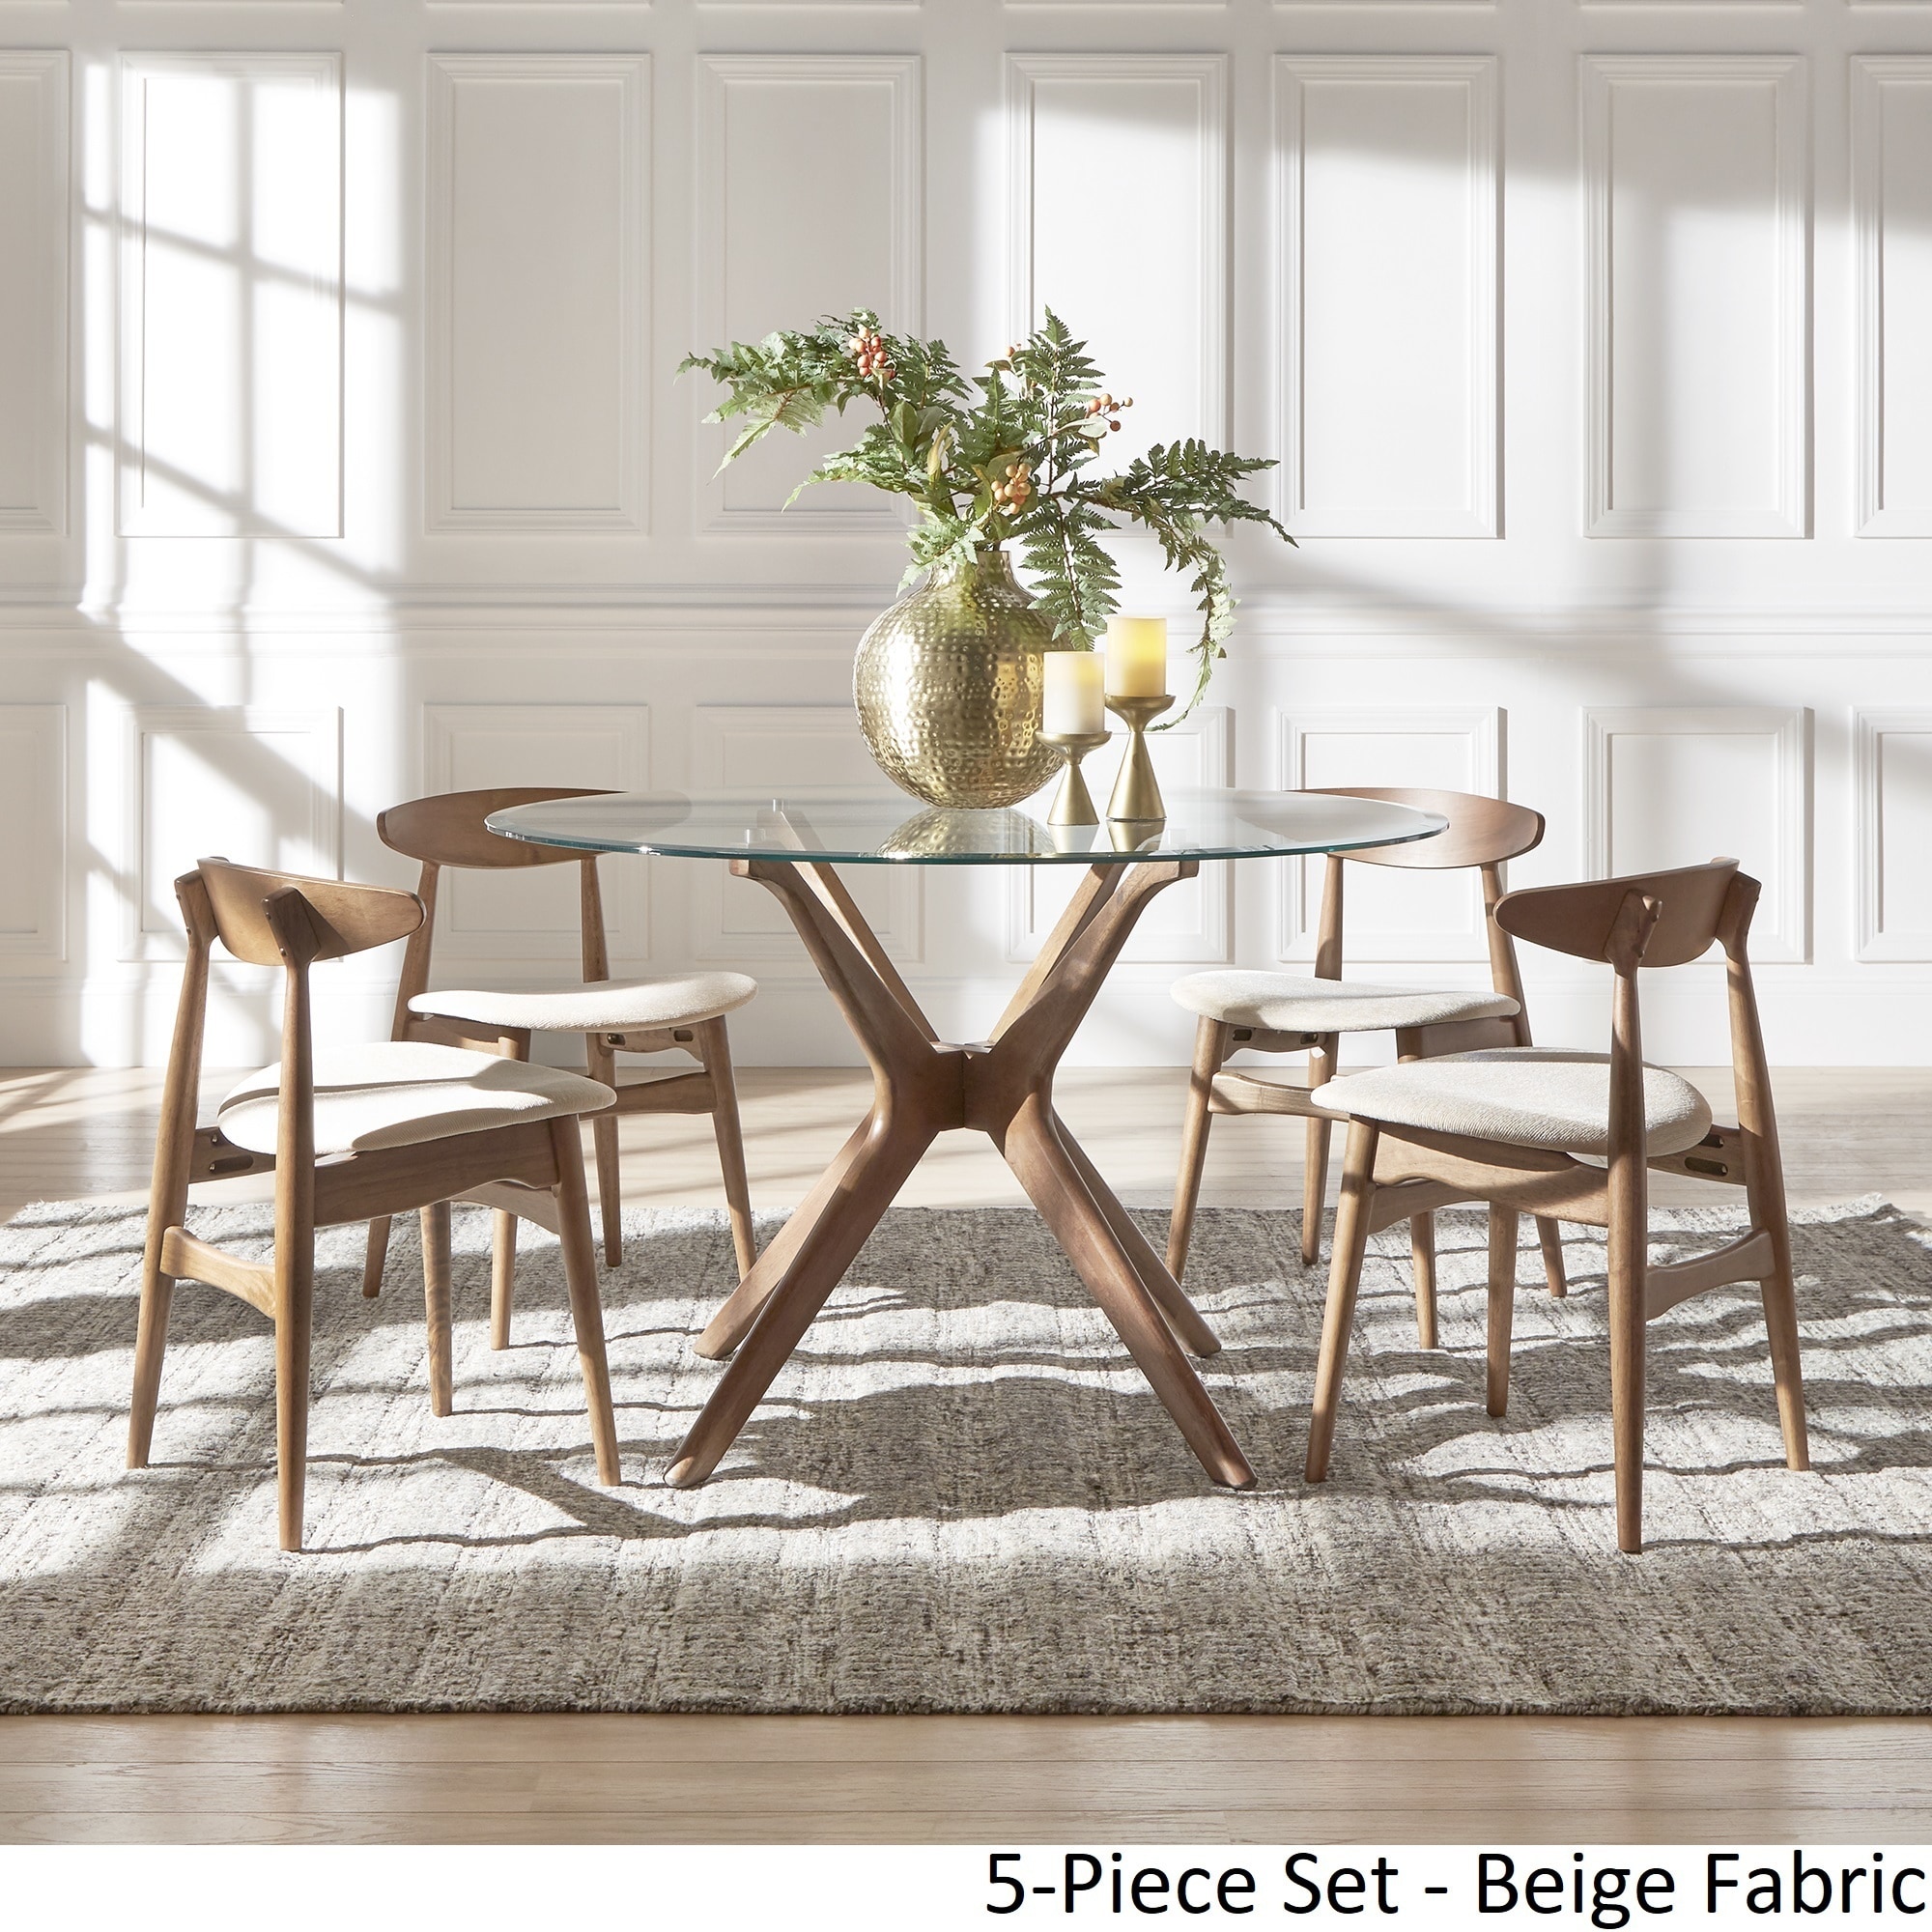 Nadine Dark Walnut Finish Glass Table Top Round Dining Set - Curved Back Chairs by Inspire Q Modern - 5 Piece - Beige